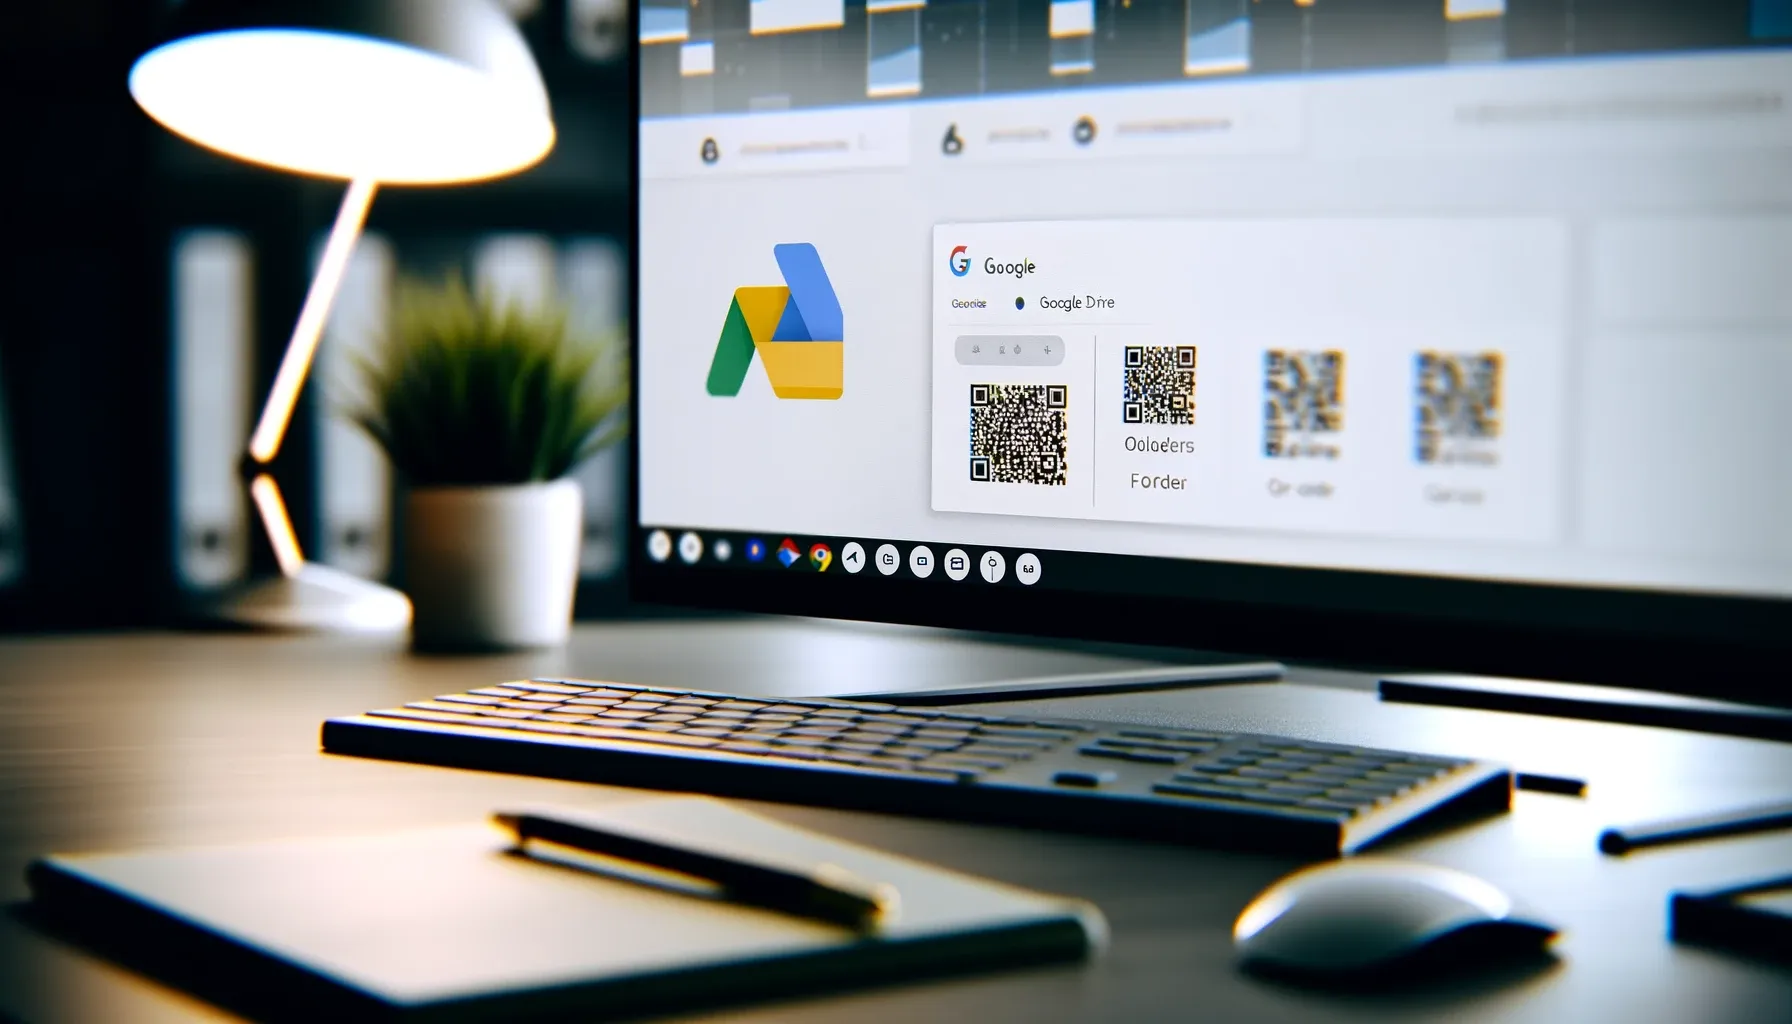 A close-up view of a workspace with a screen displaying Google Drive folders and QR codes